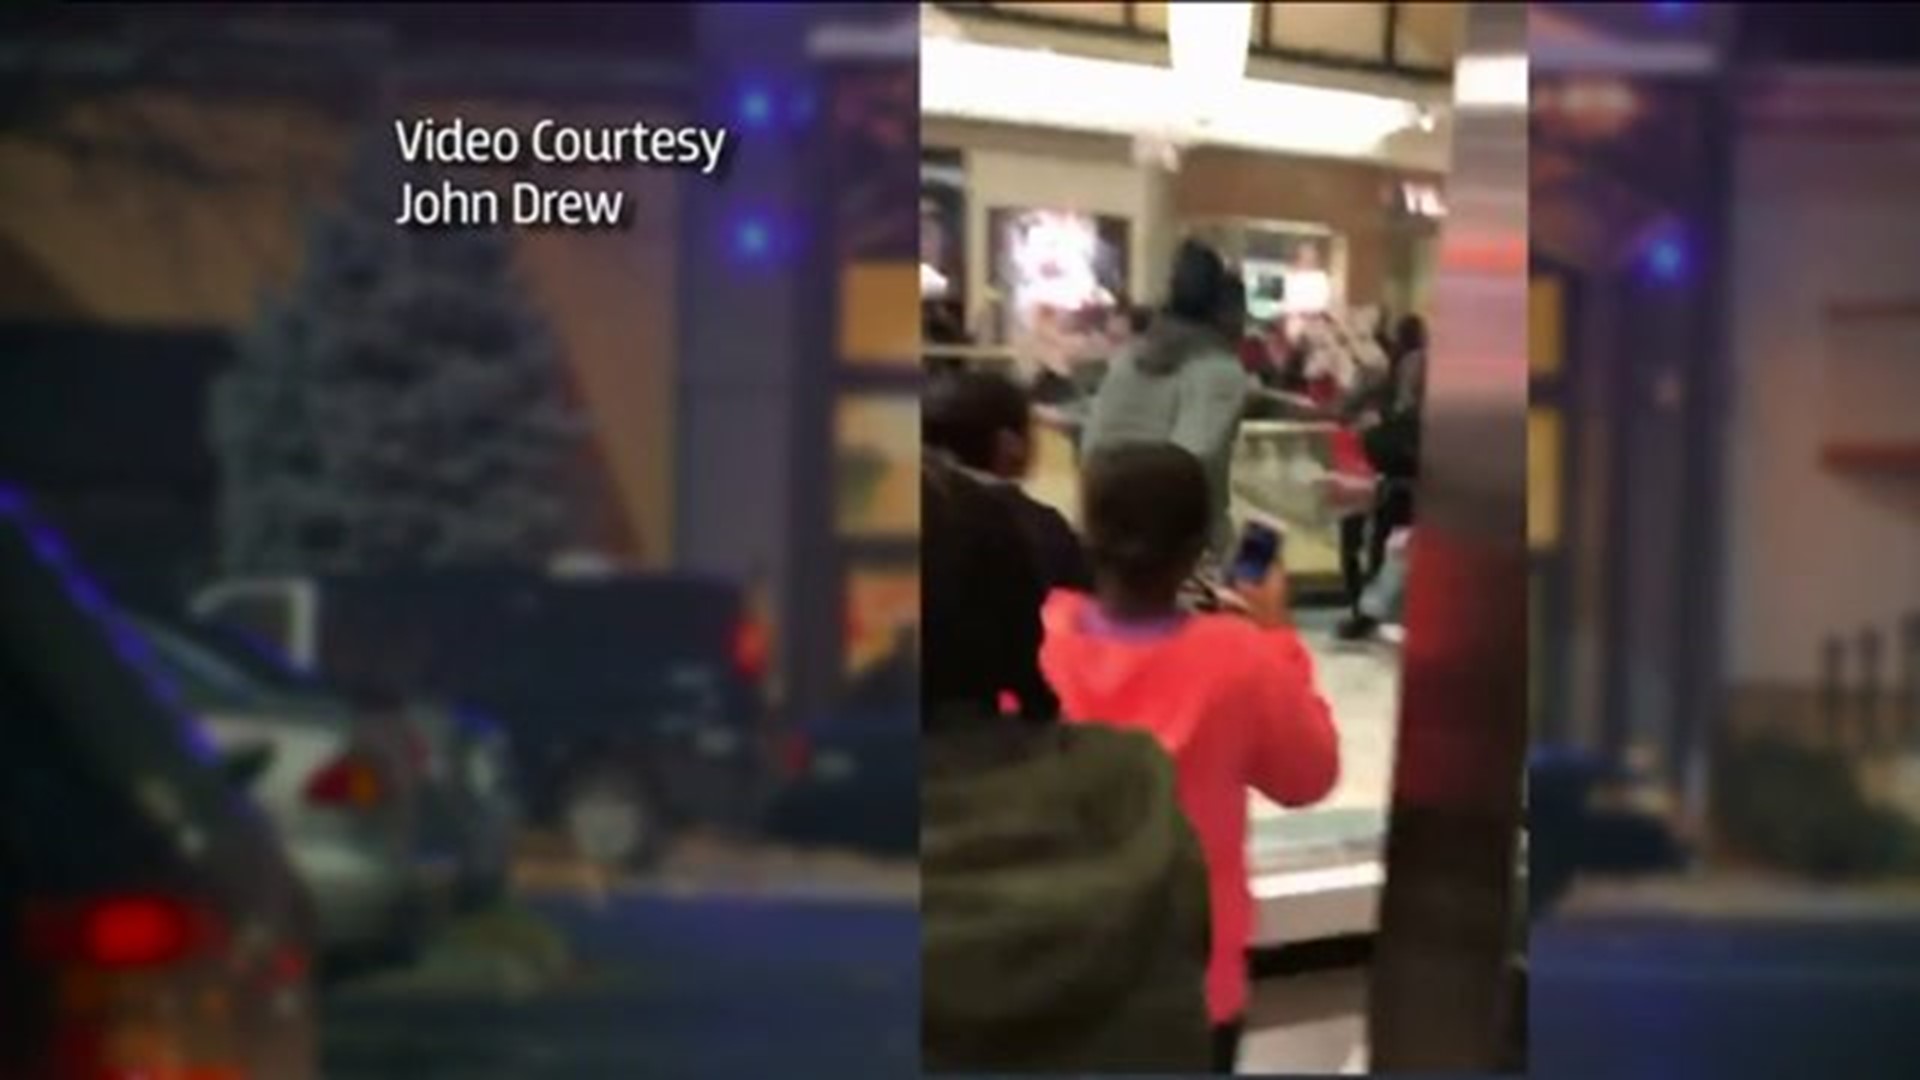 Brawls break out in Manchester mall, leading to injuries and arrests